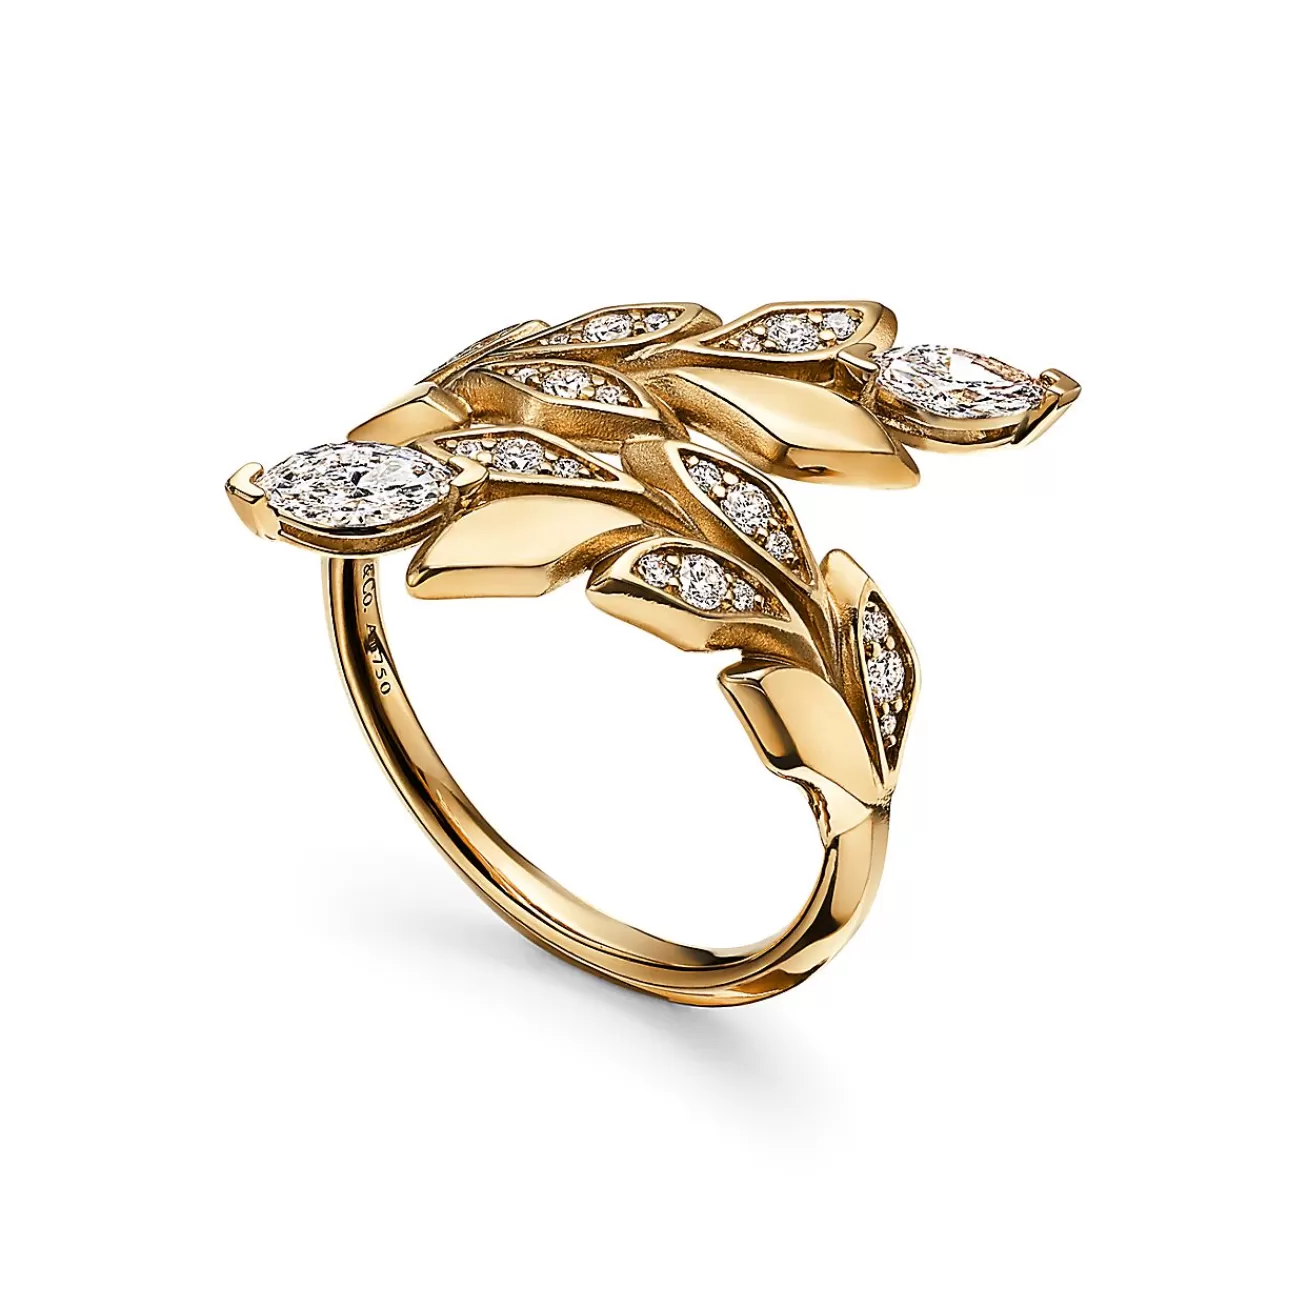 Tiffany & Co. Tiffany Victoria® Vine Bypass Ring in Yellow Gold with Diamonds | ^ Rings | Gold Jewelry